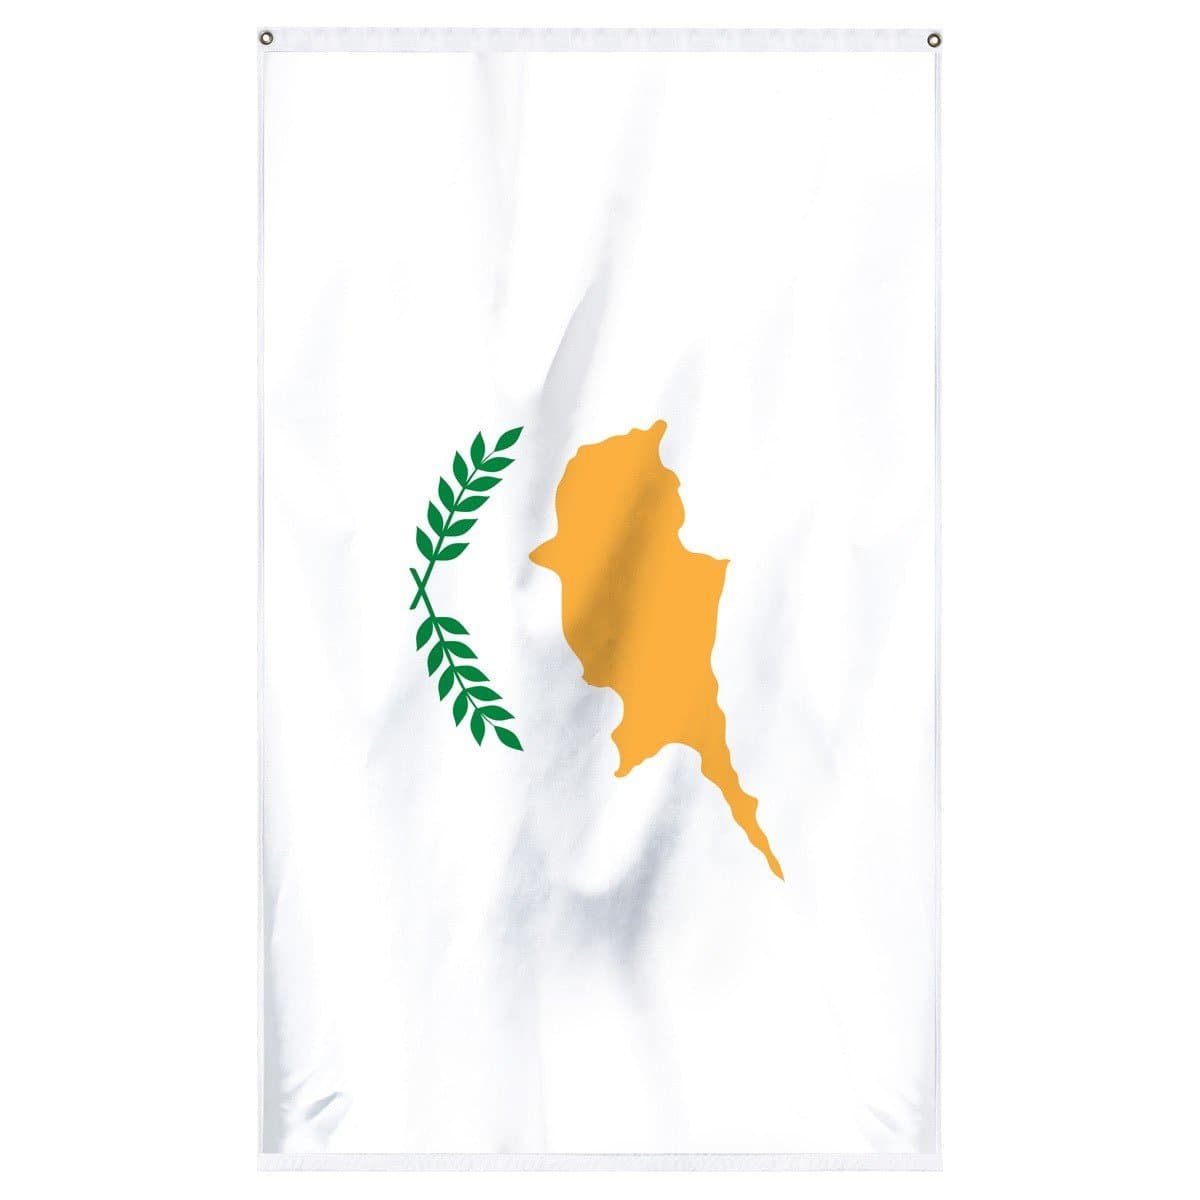 The National flag of Cyprus for sale for flying on flagpoles and in parades